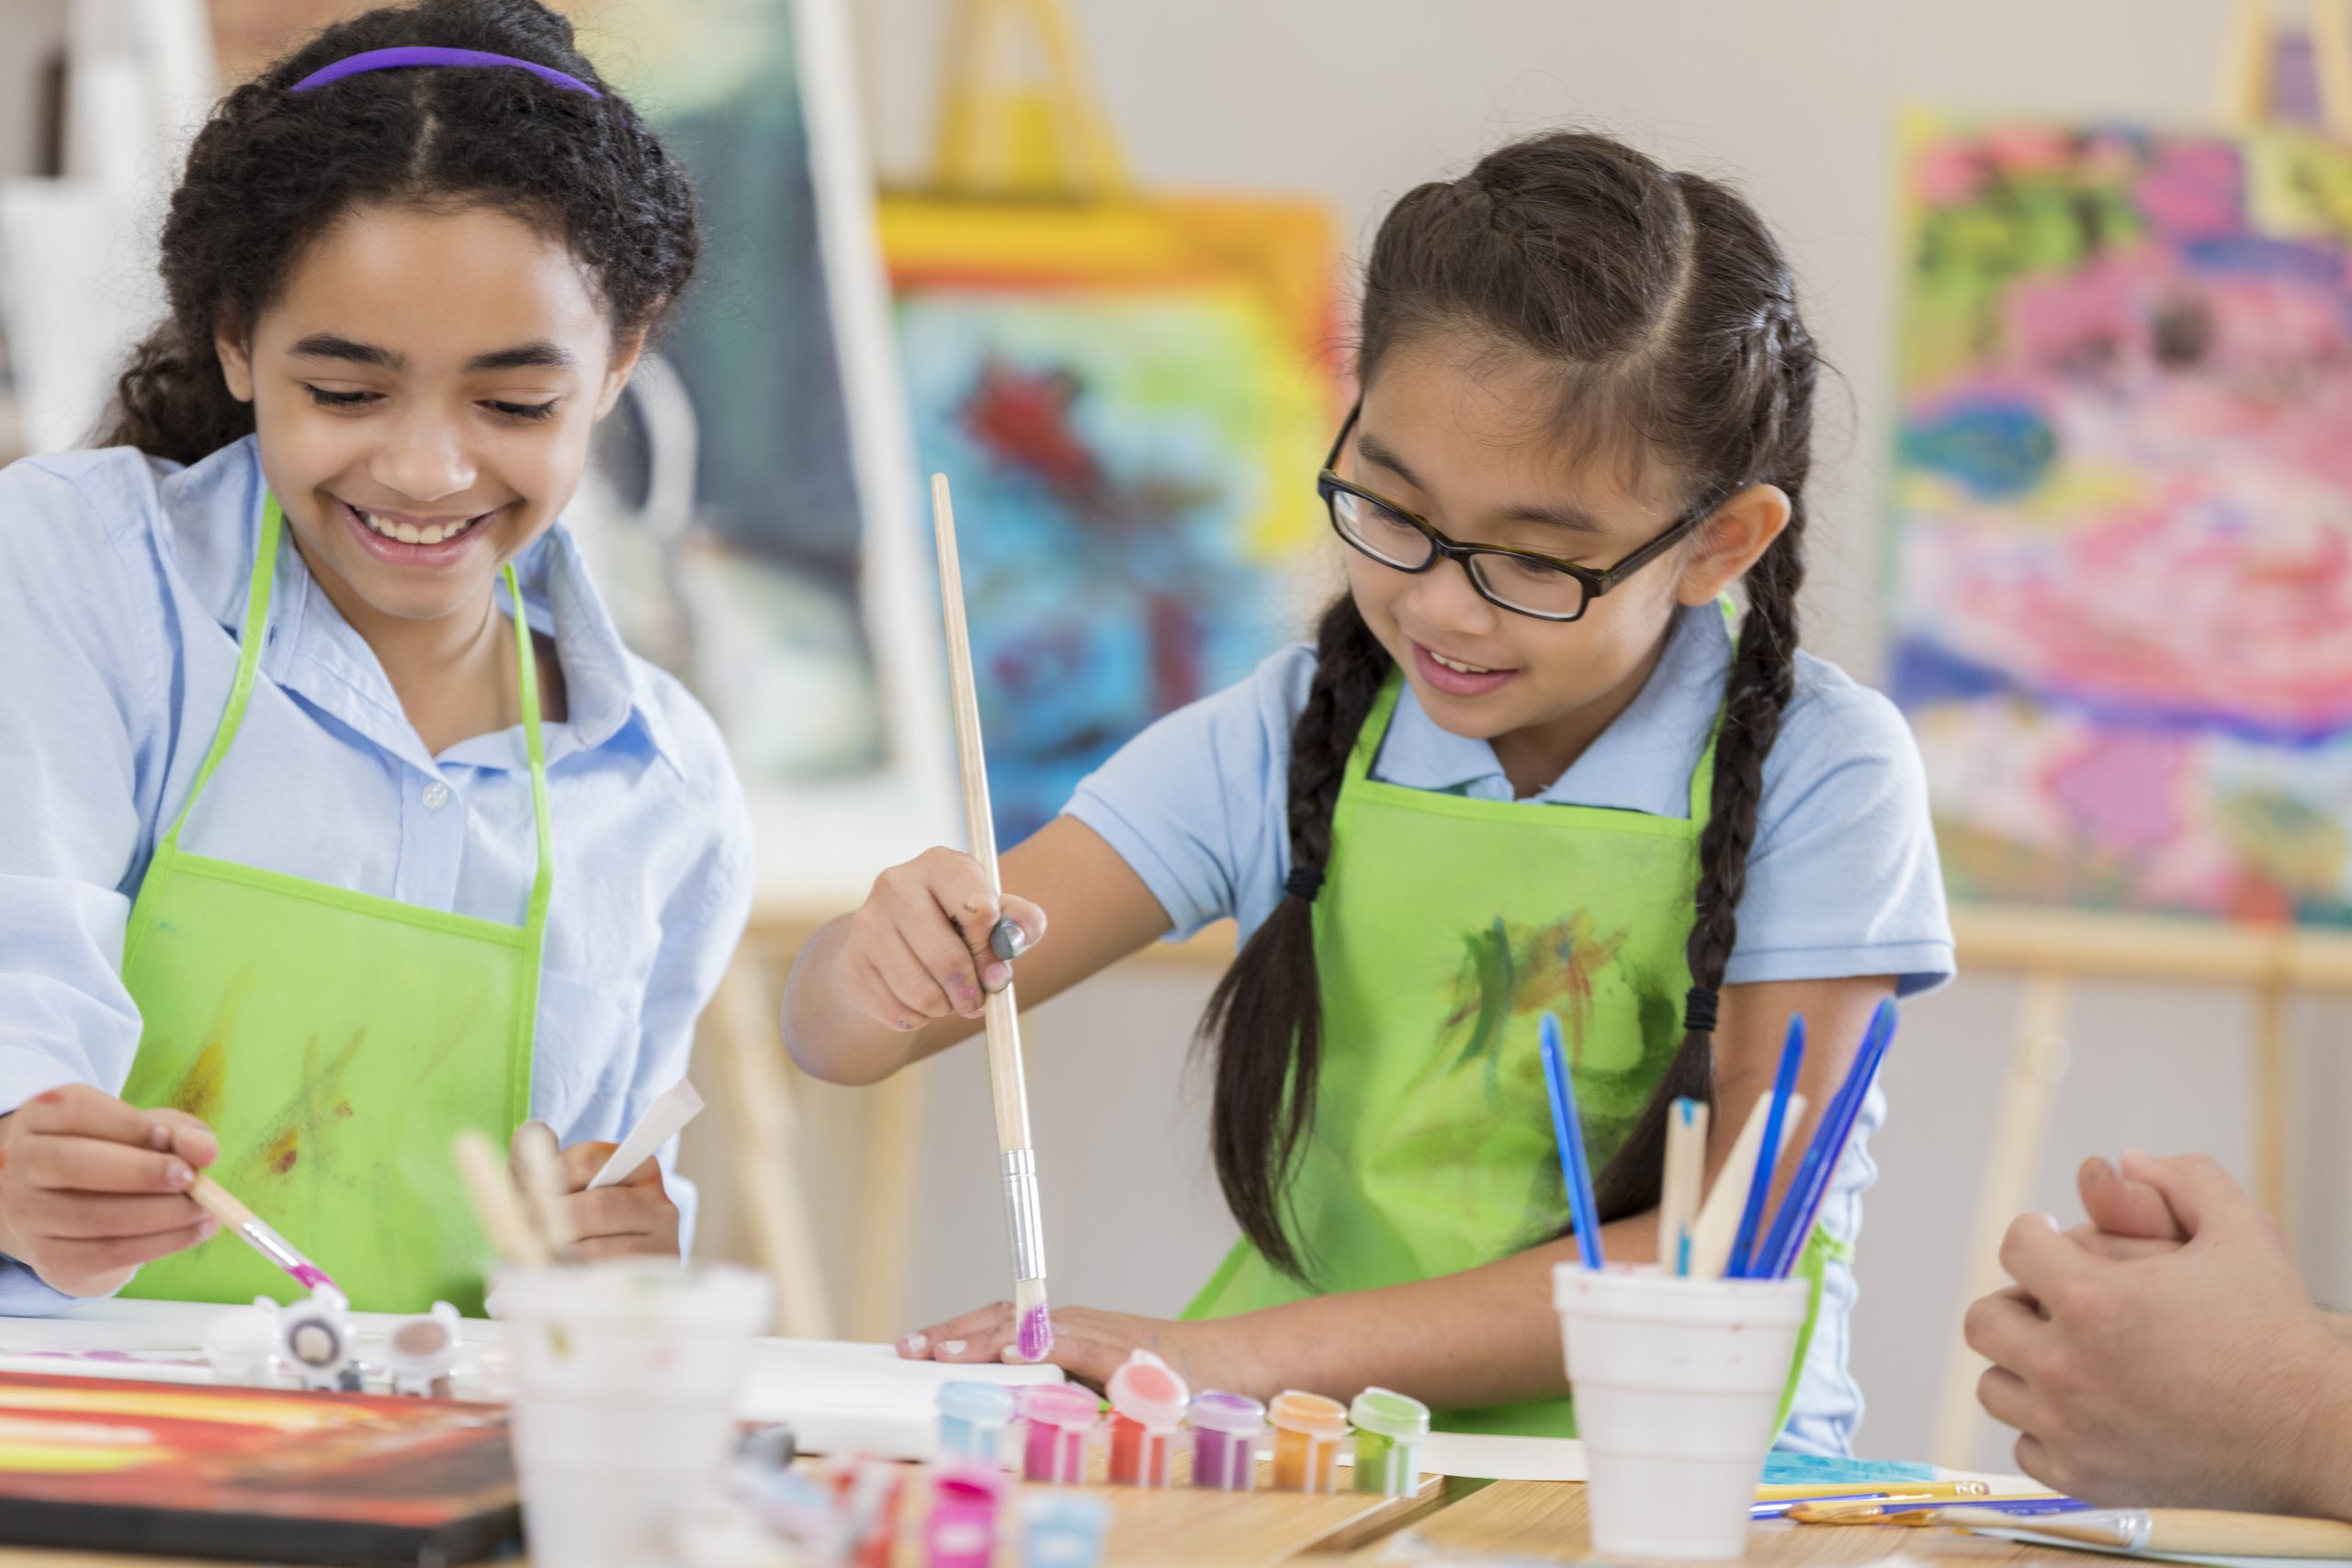 Two elementary school-aged students painting in a classroom.